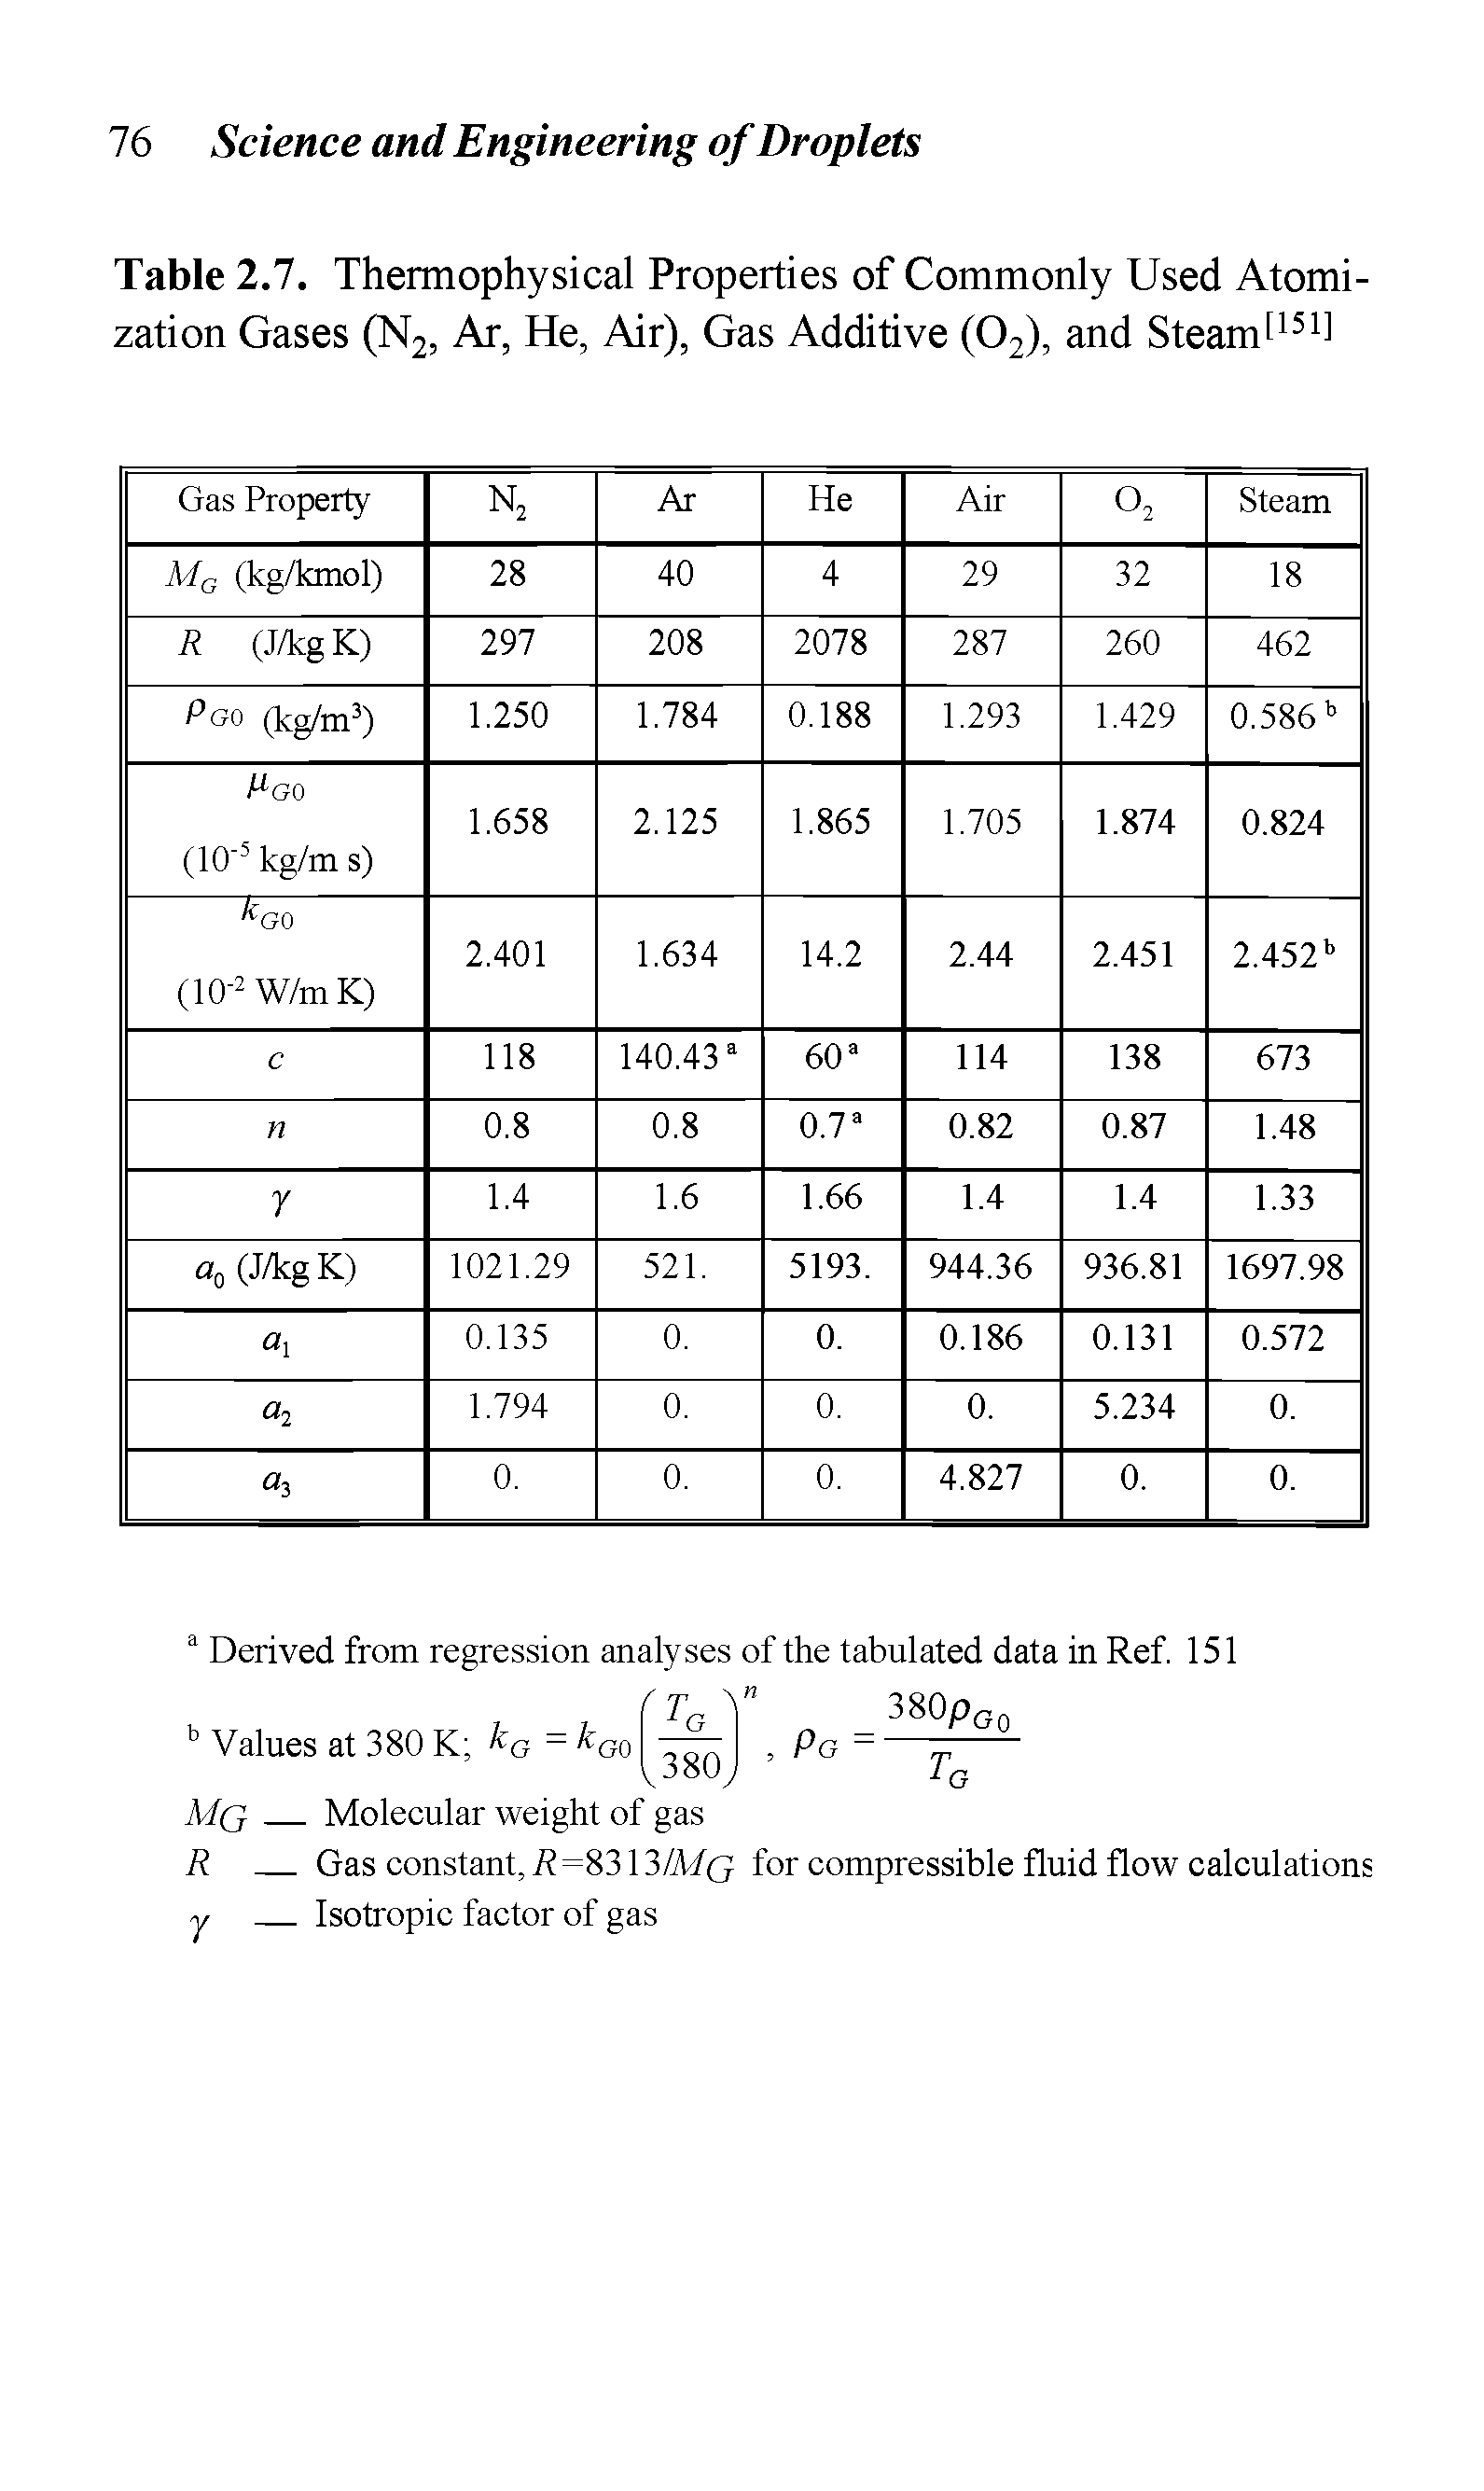 Table 2.7. Thermophysical Properties of Commonly Used Atomization Gases (N2, Ar, He, Air), Gas Additive (02), and Steam[151]...